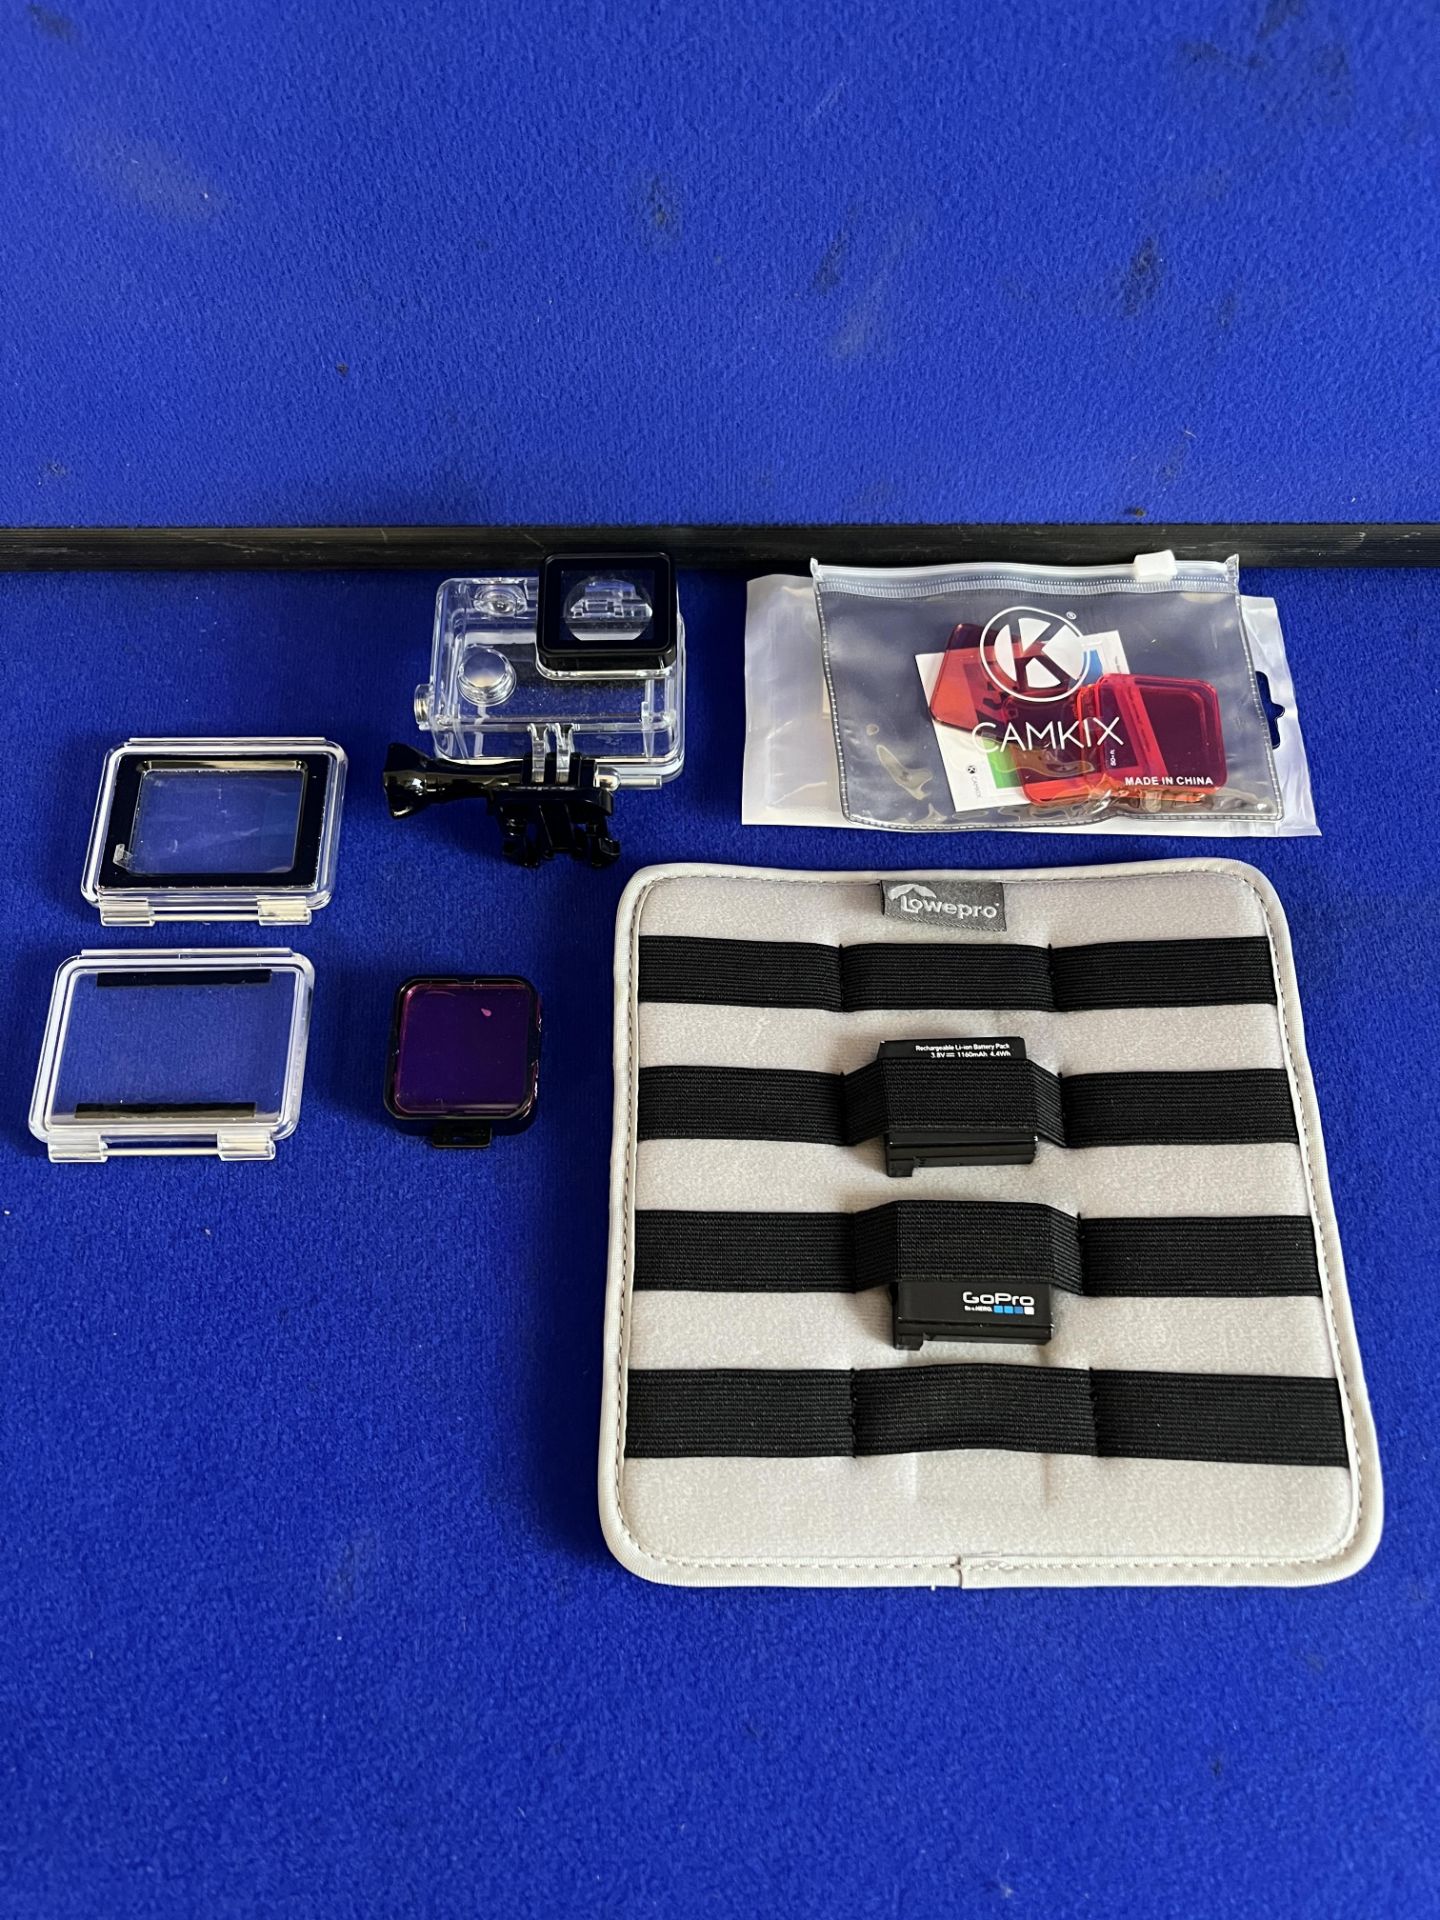 GoPro Hero 4 Camera with accessories - as pictured - Image 3 of 8